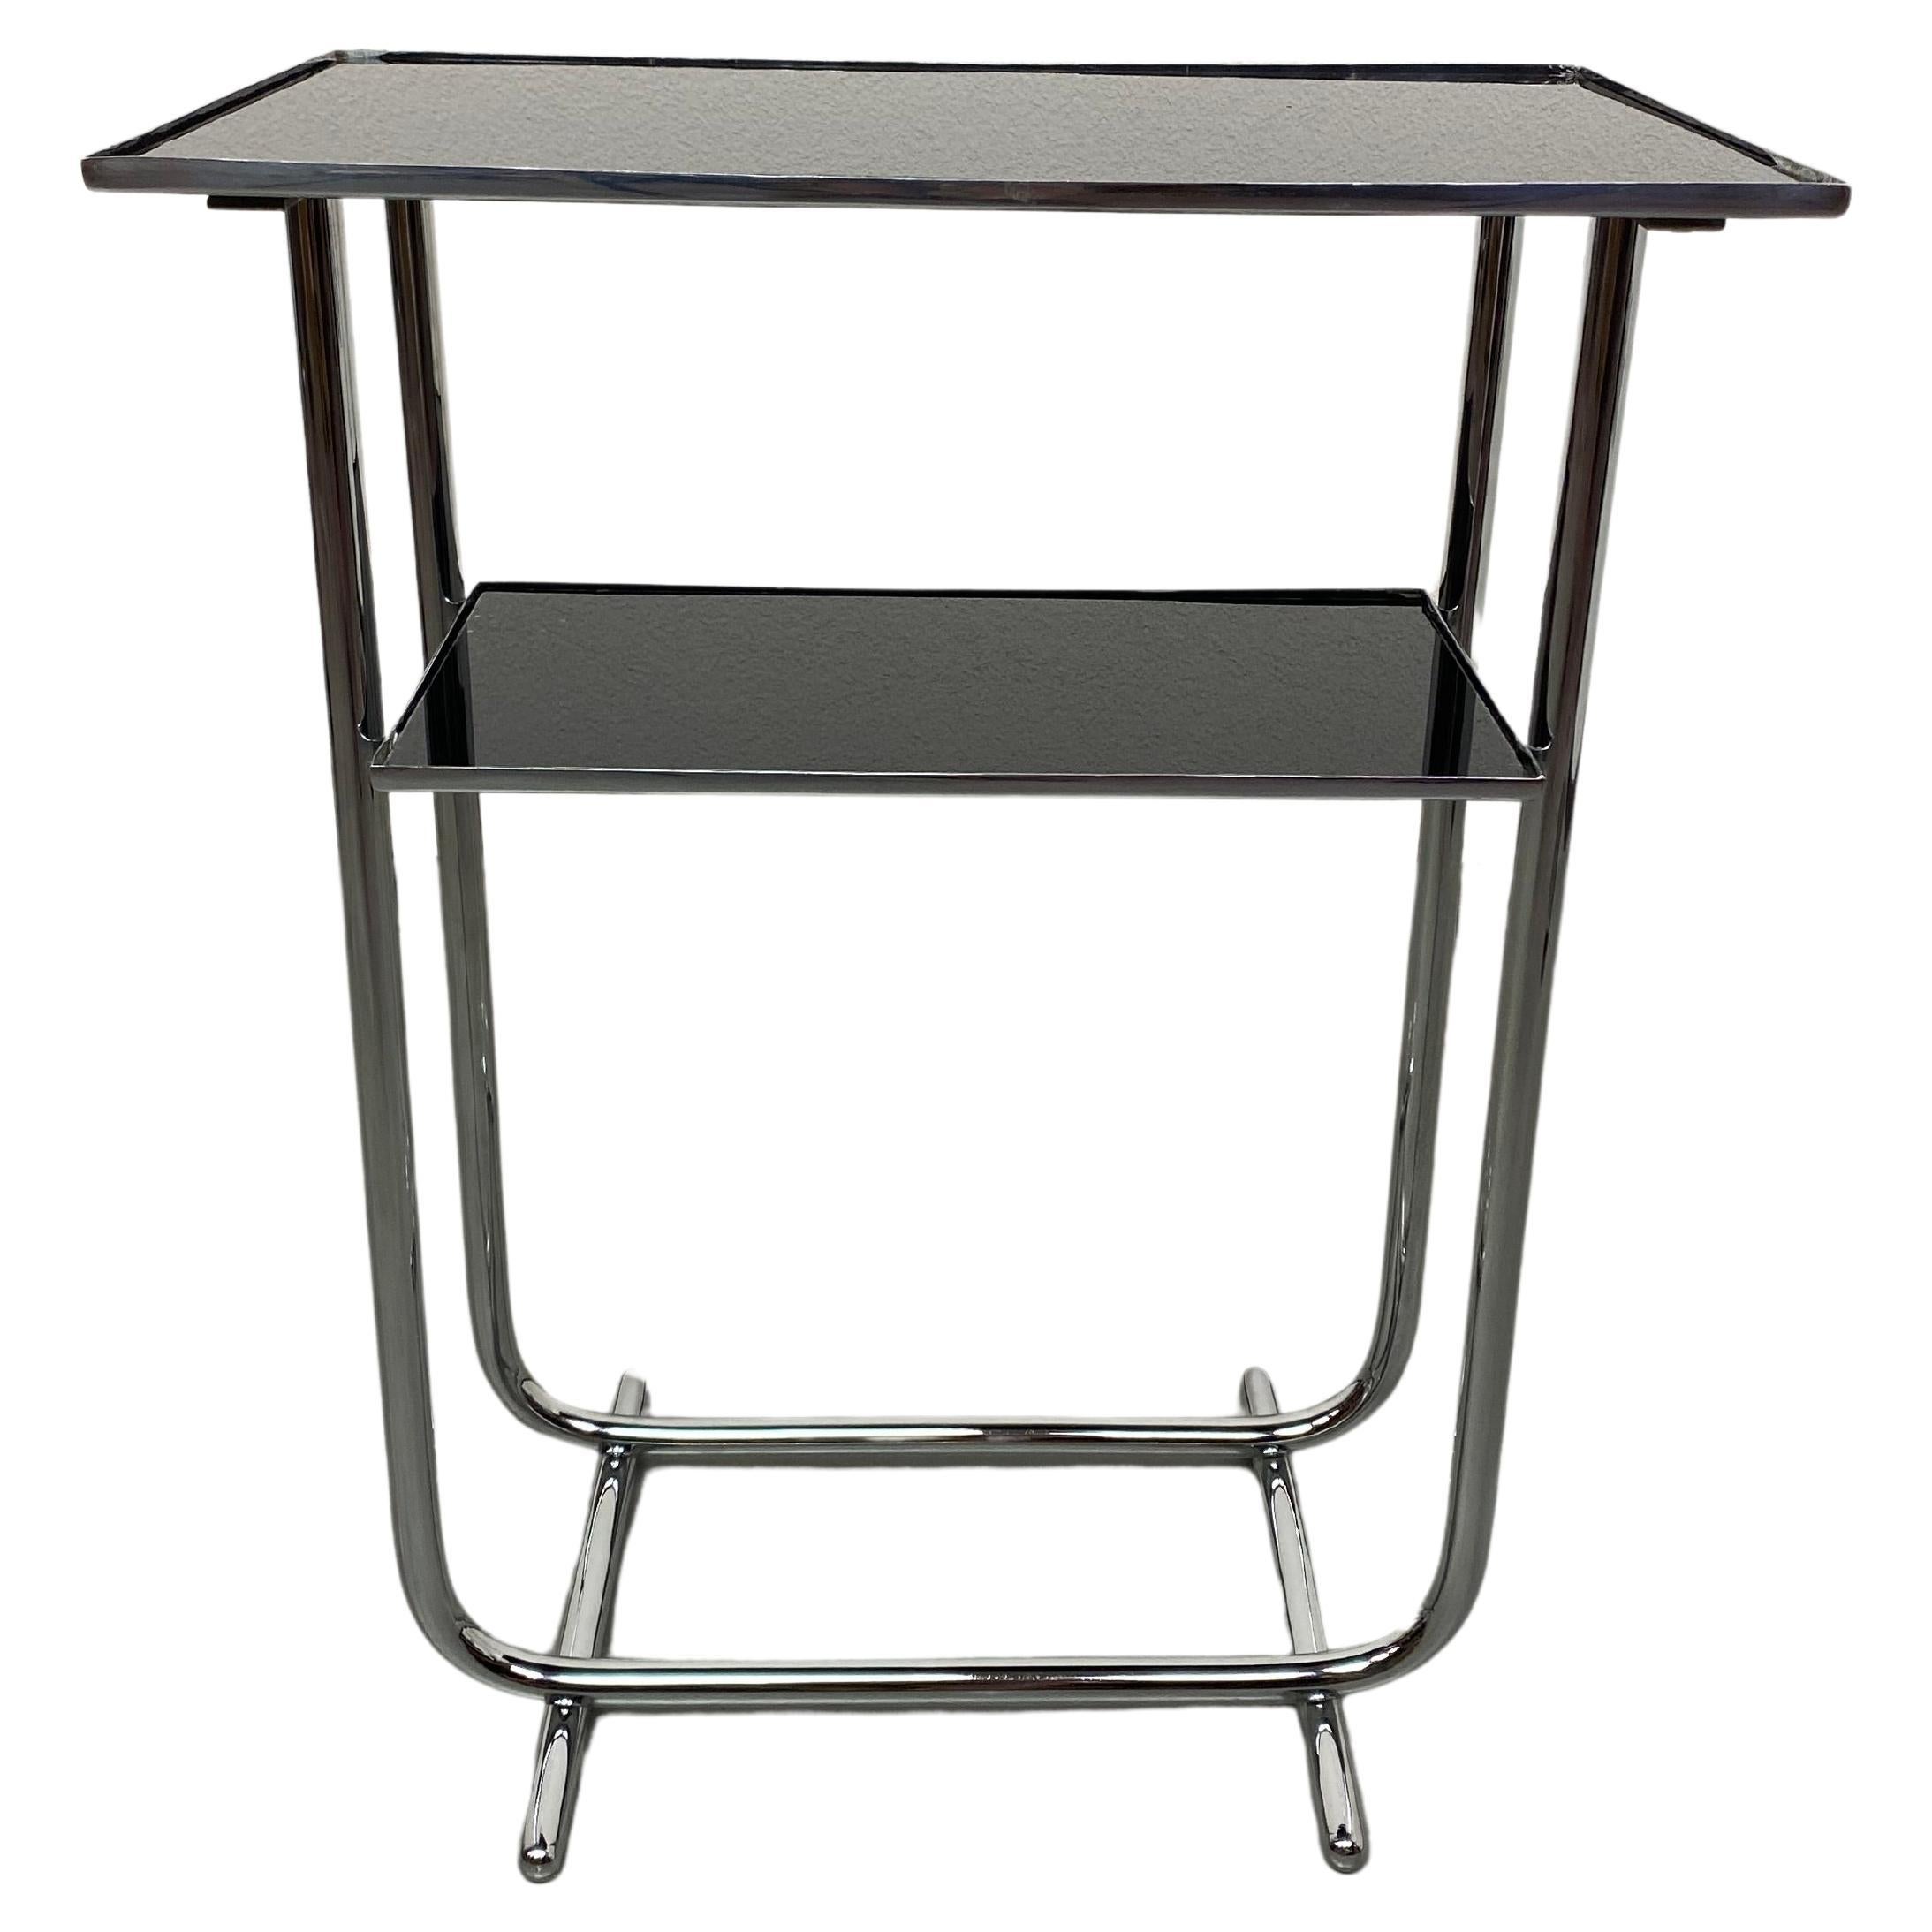 Bauhaus side table with black glass top For Sale at 1stDibs